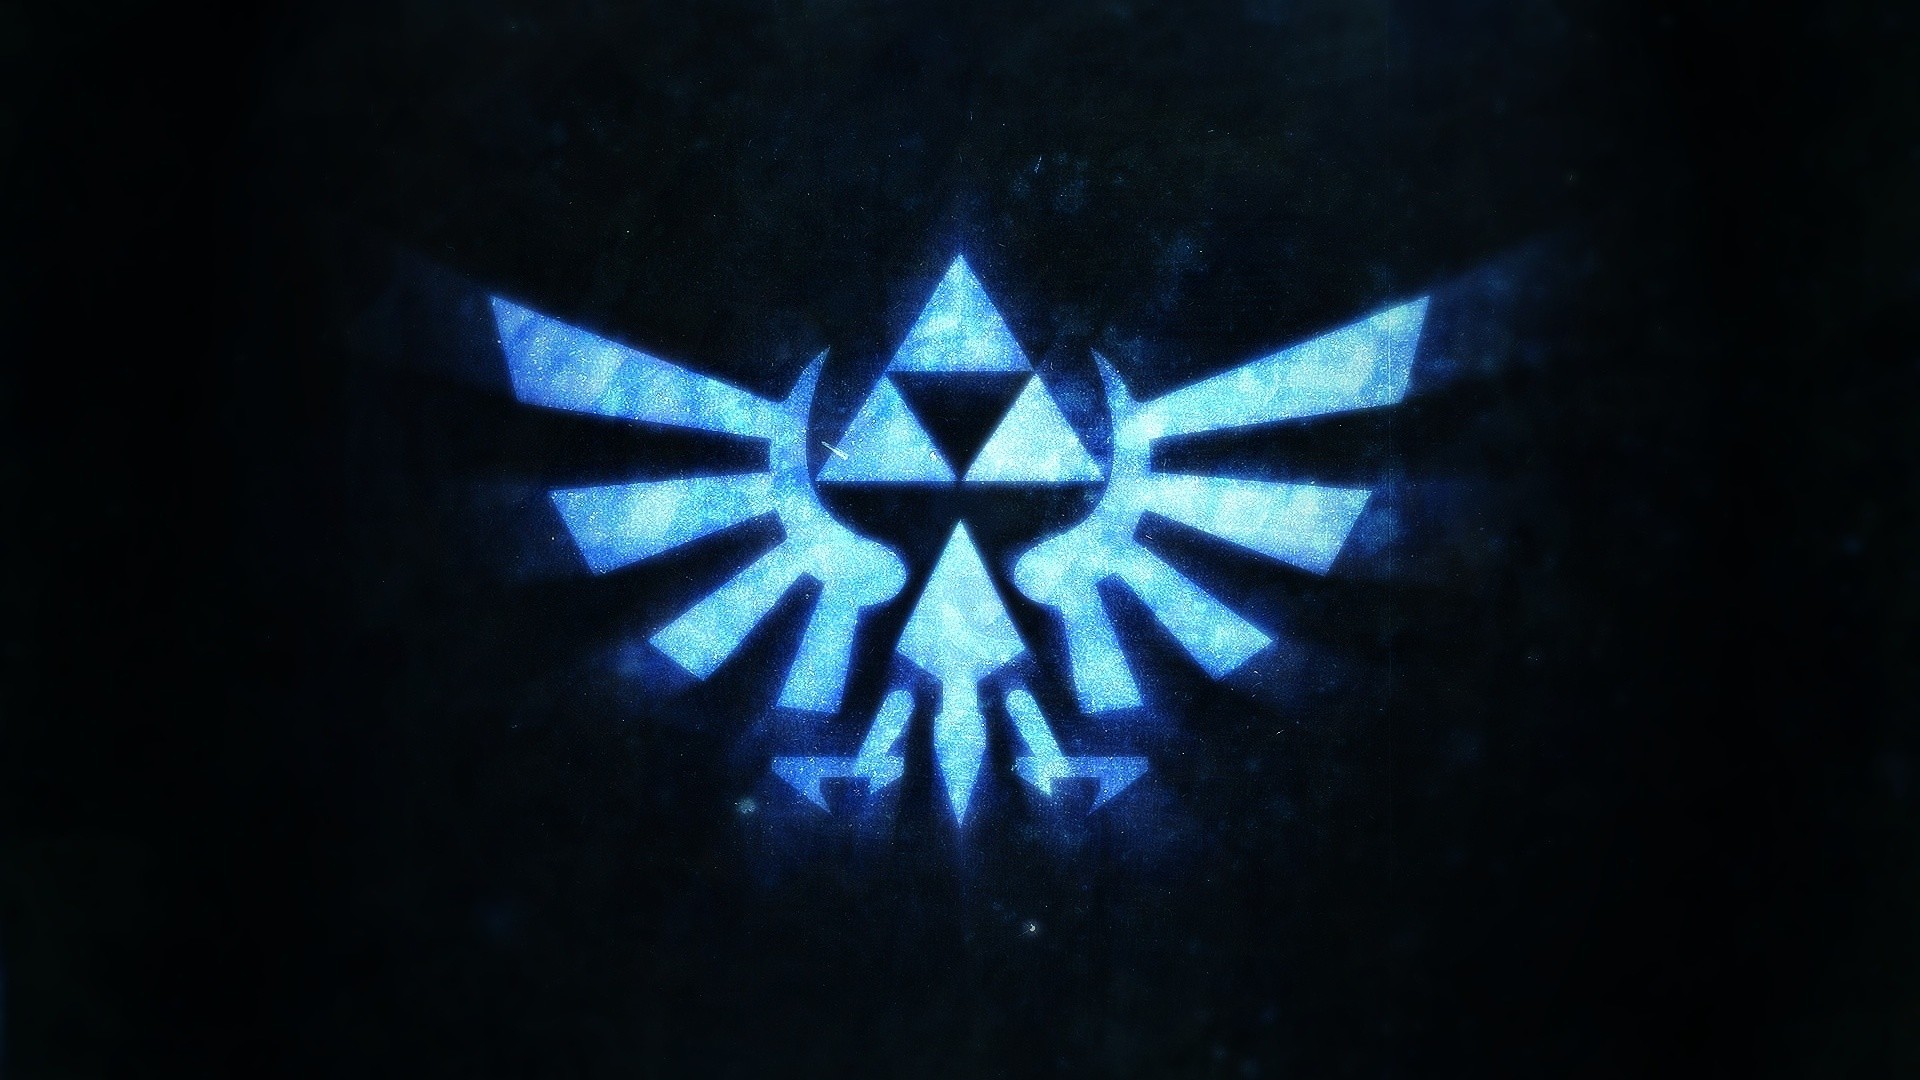 1920x1080 My wallpaper, also changed my start orb to a triforce.